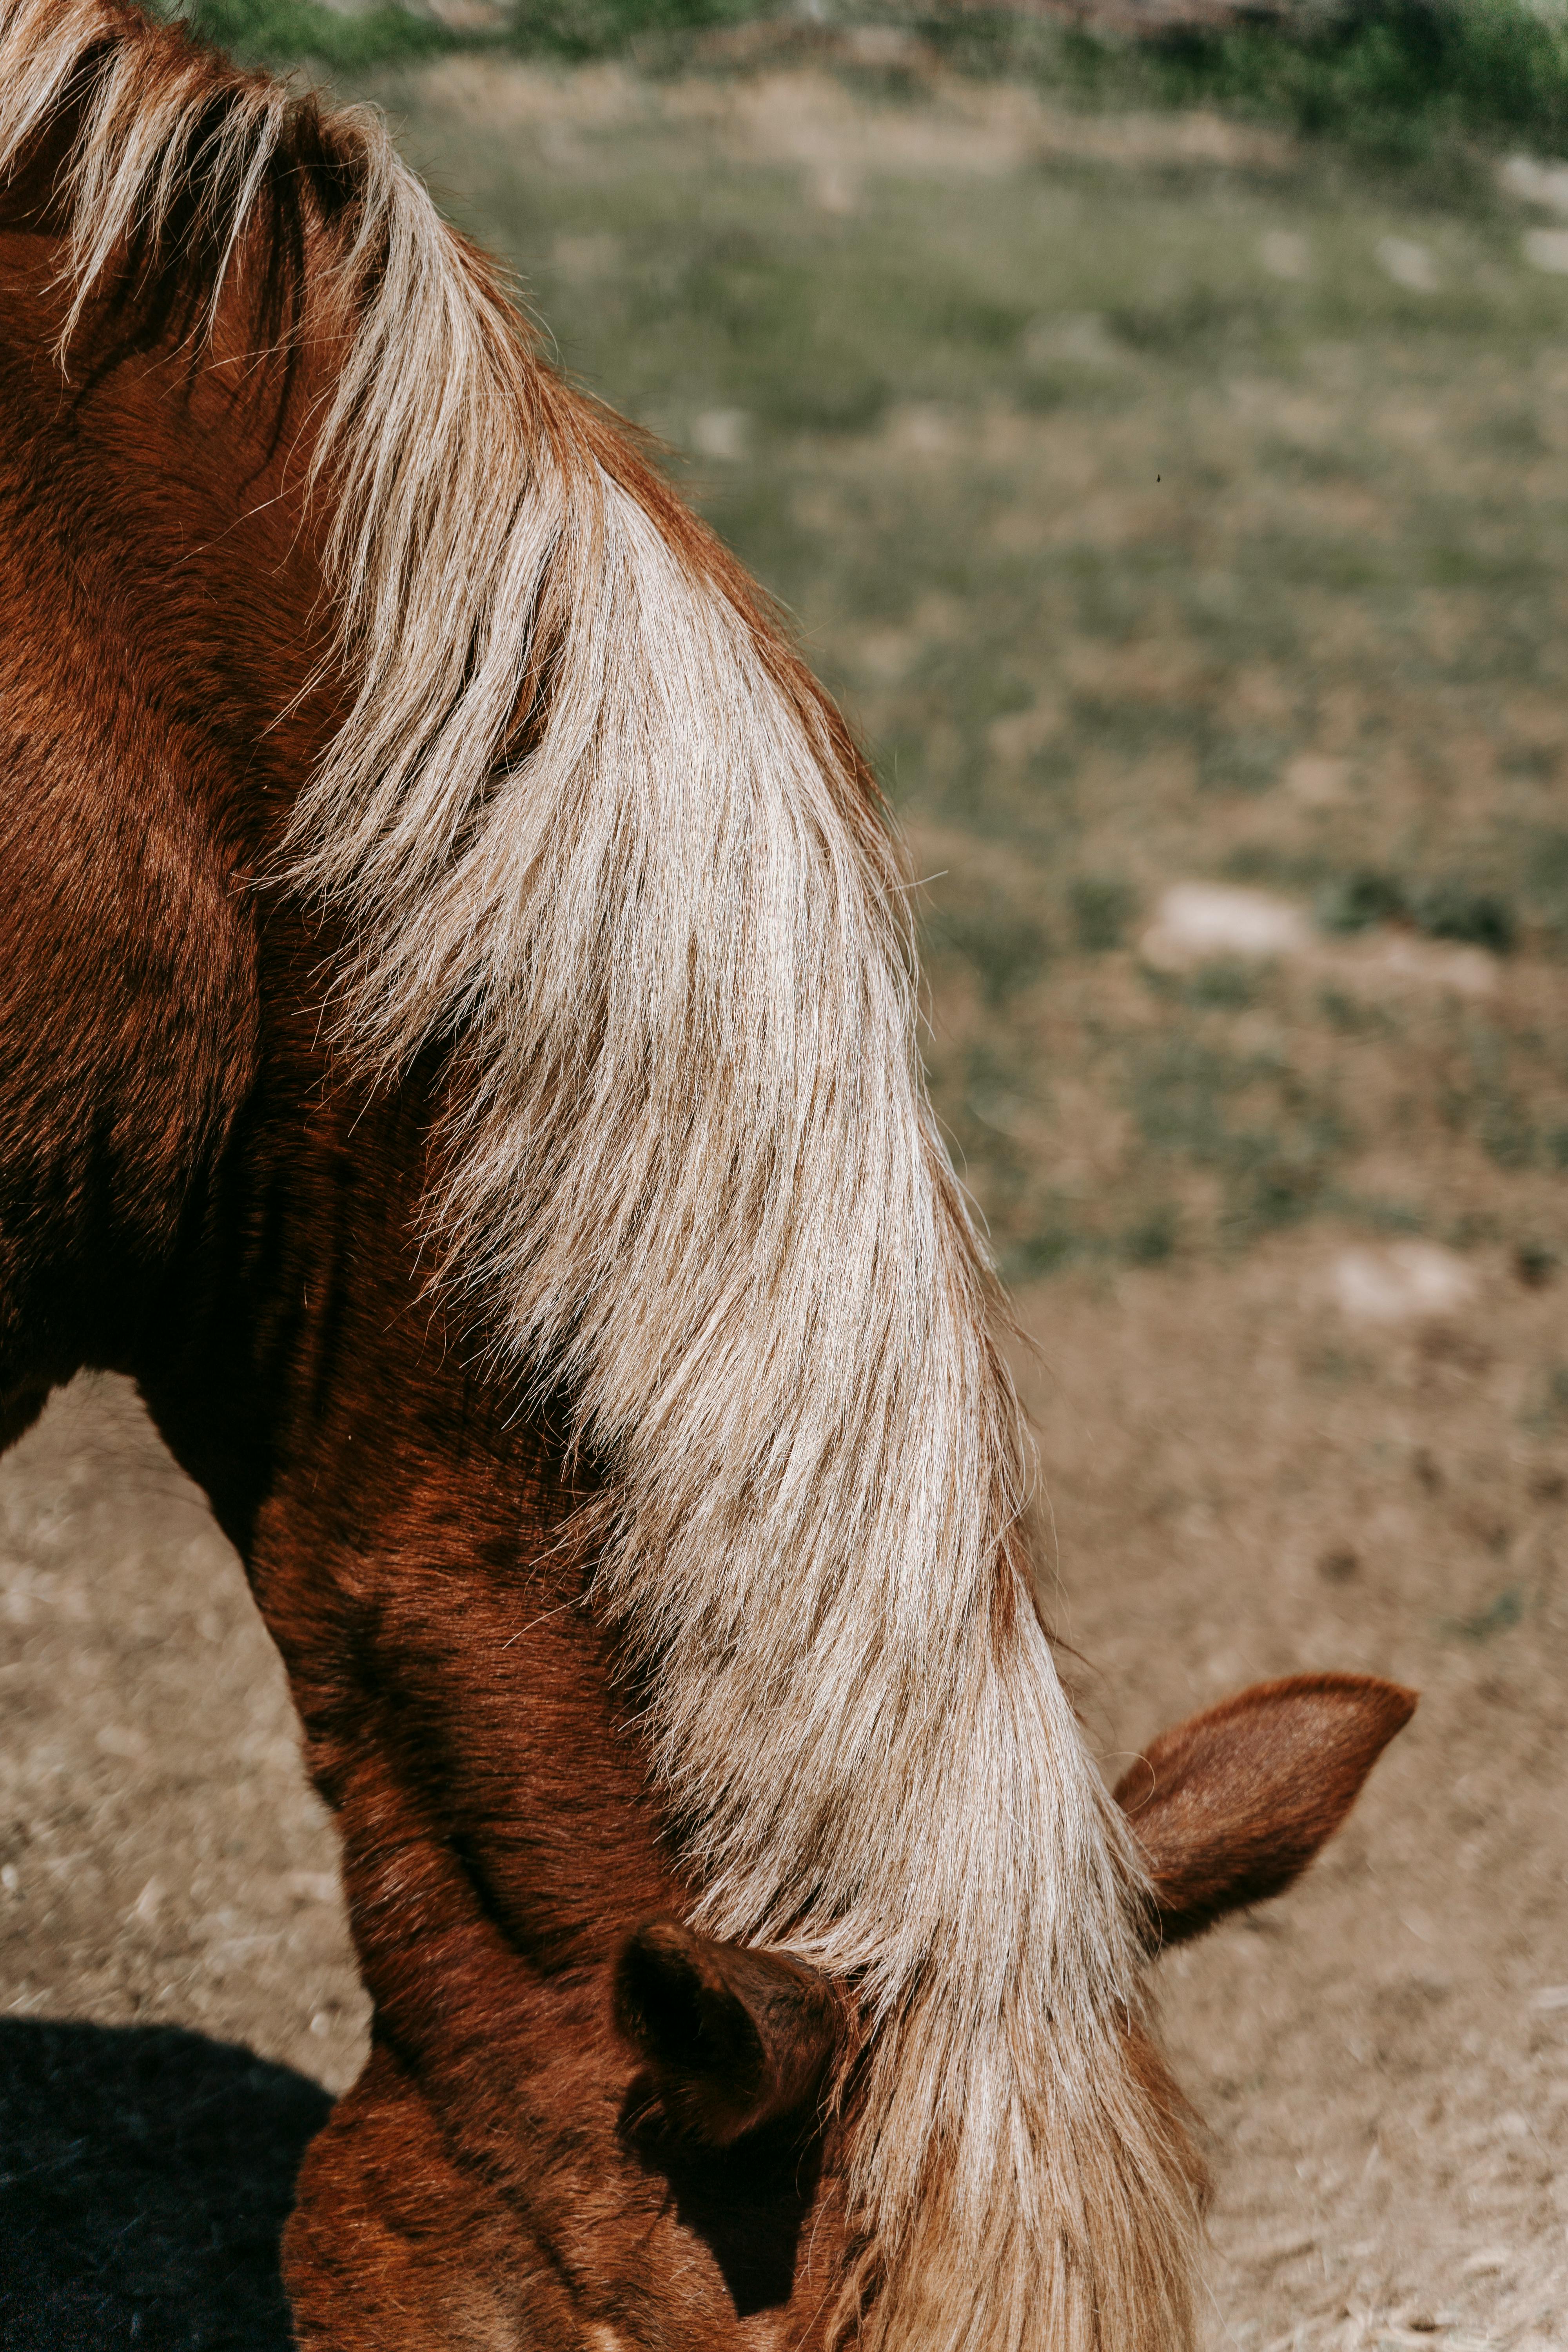 Horse Hair Equine Royalty Free Photo